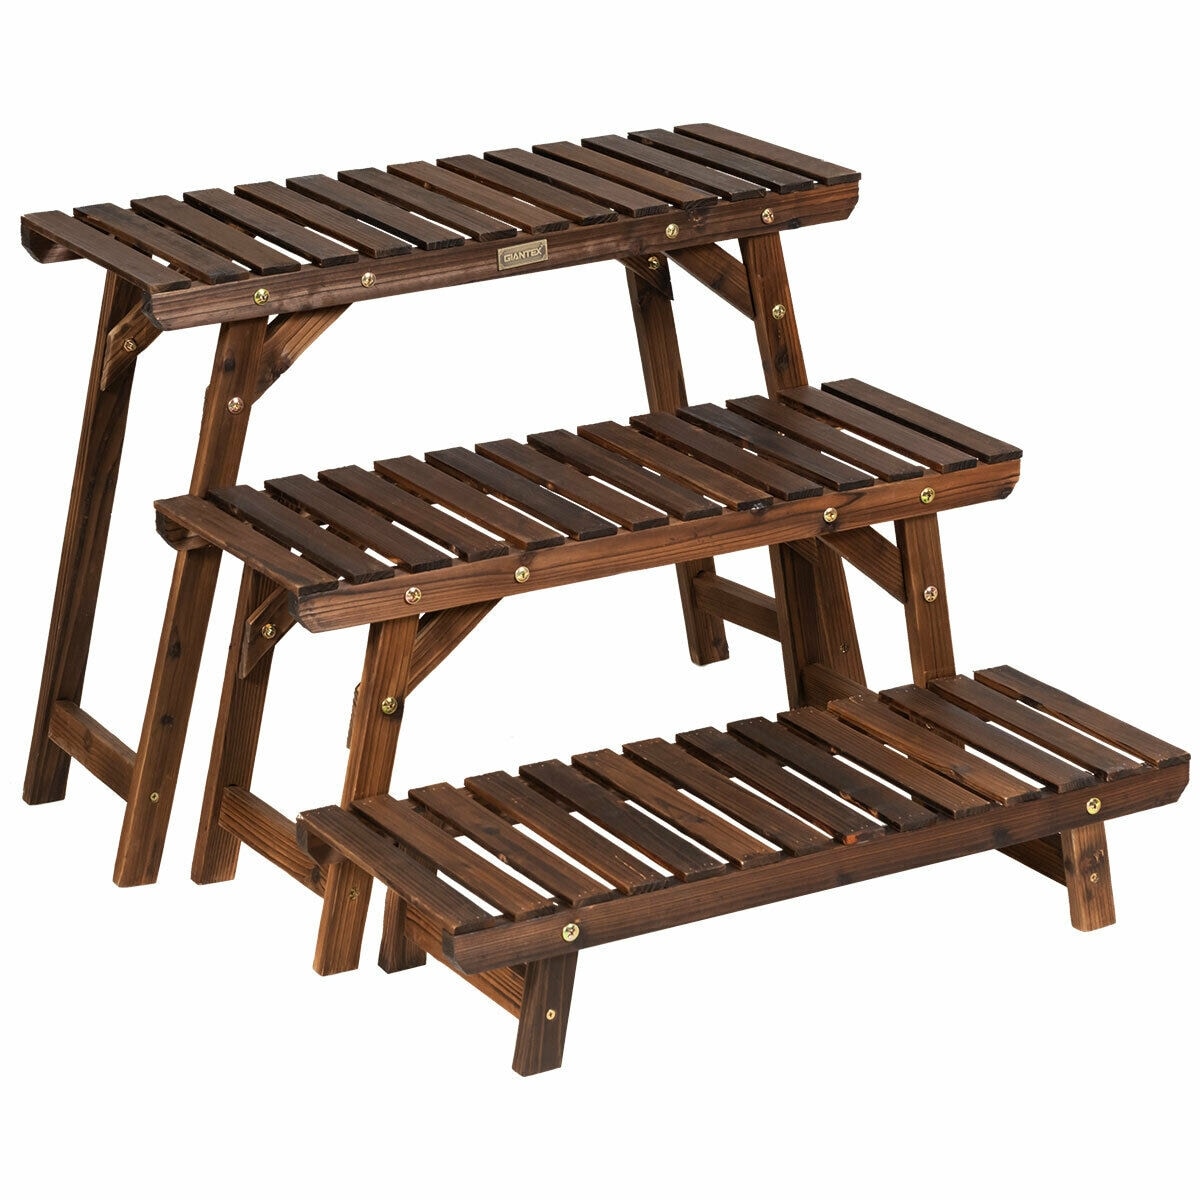 Rectangular Plant Stands at Lowes.com